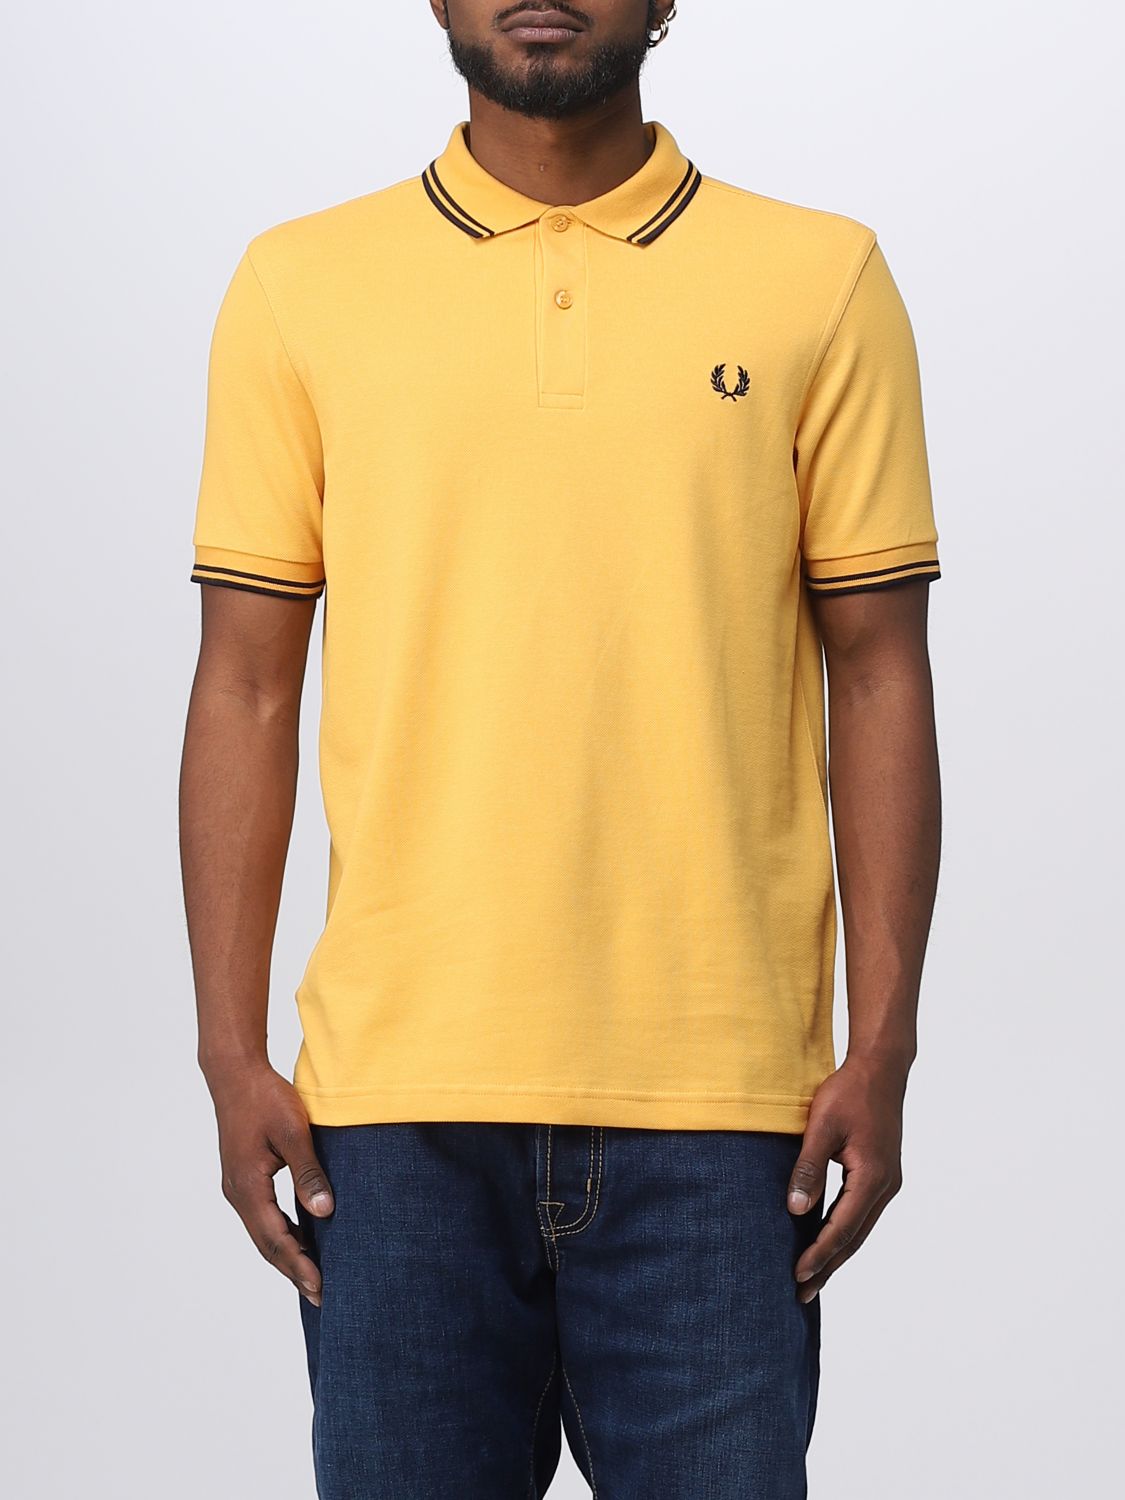 Fred Perry Outlet: polo shirt for man - Yellow | Fred Perry polo shirt ...